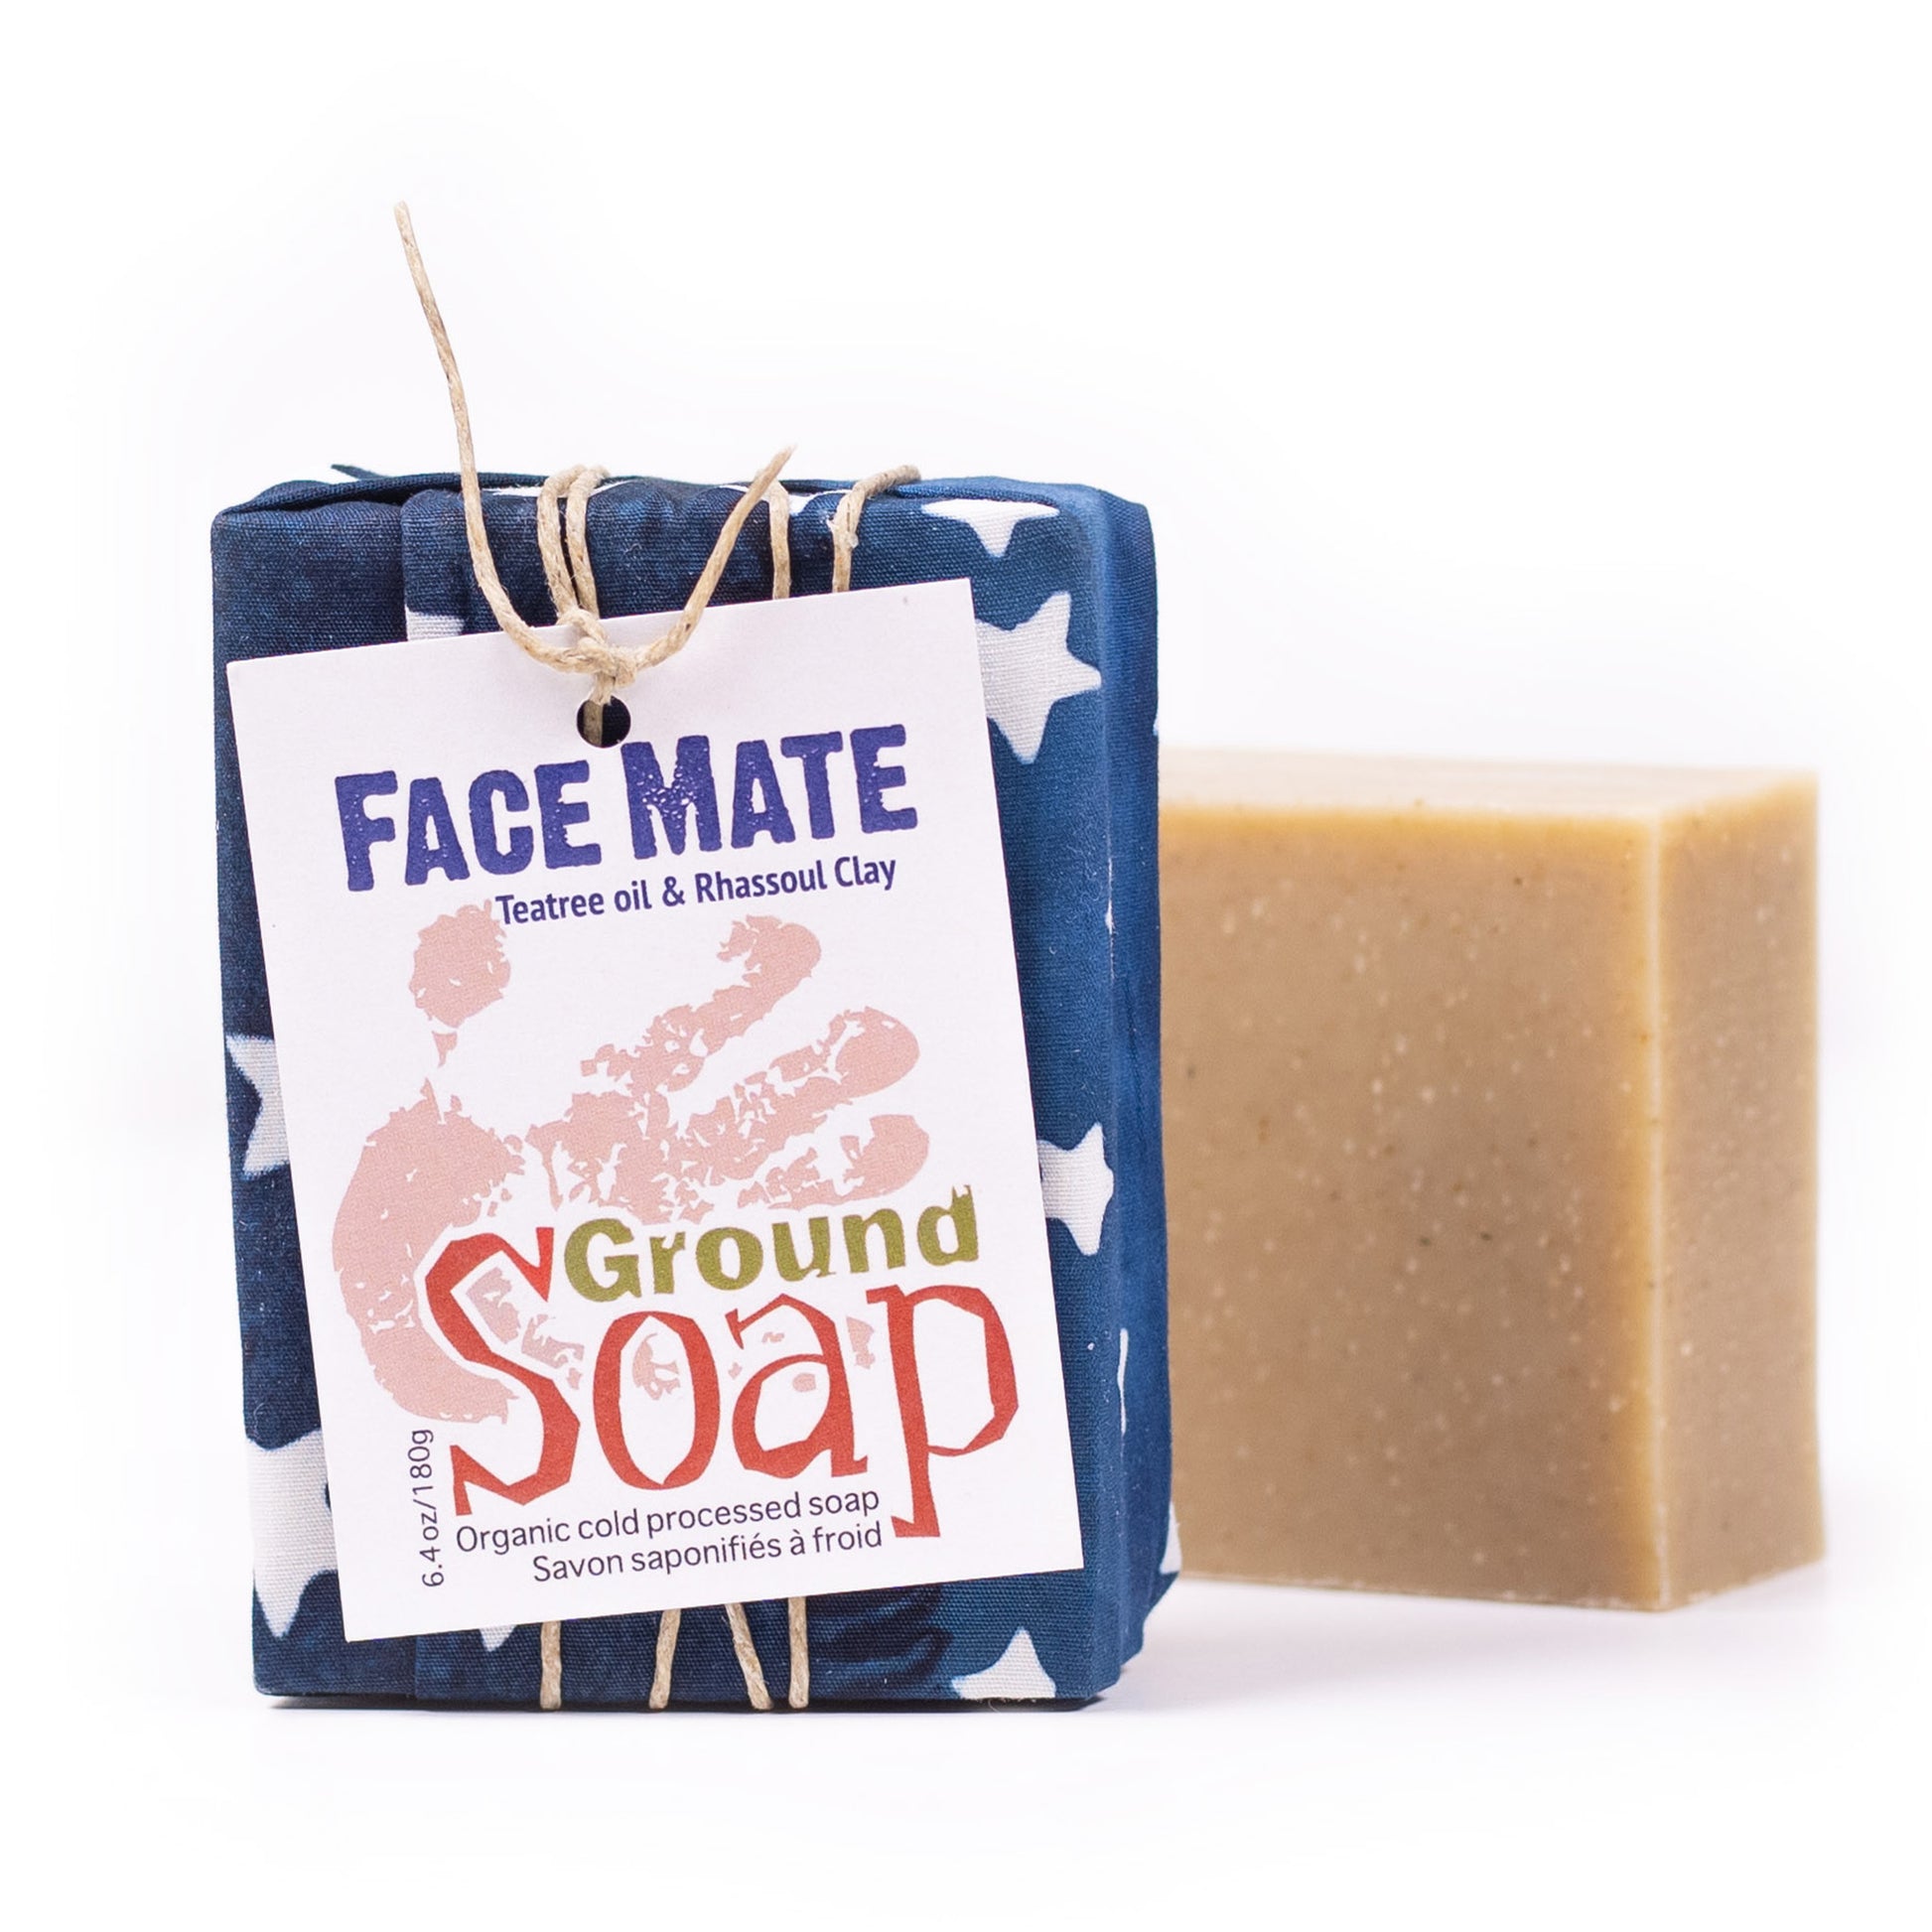 One wrapped and one naked bar of Face Mate Teatree essential oil and rhassoul clay organic bar soap from ground Soap. 